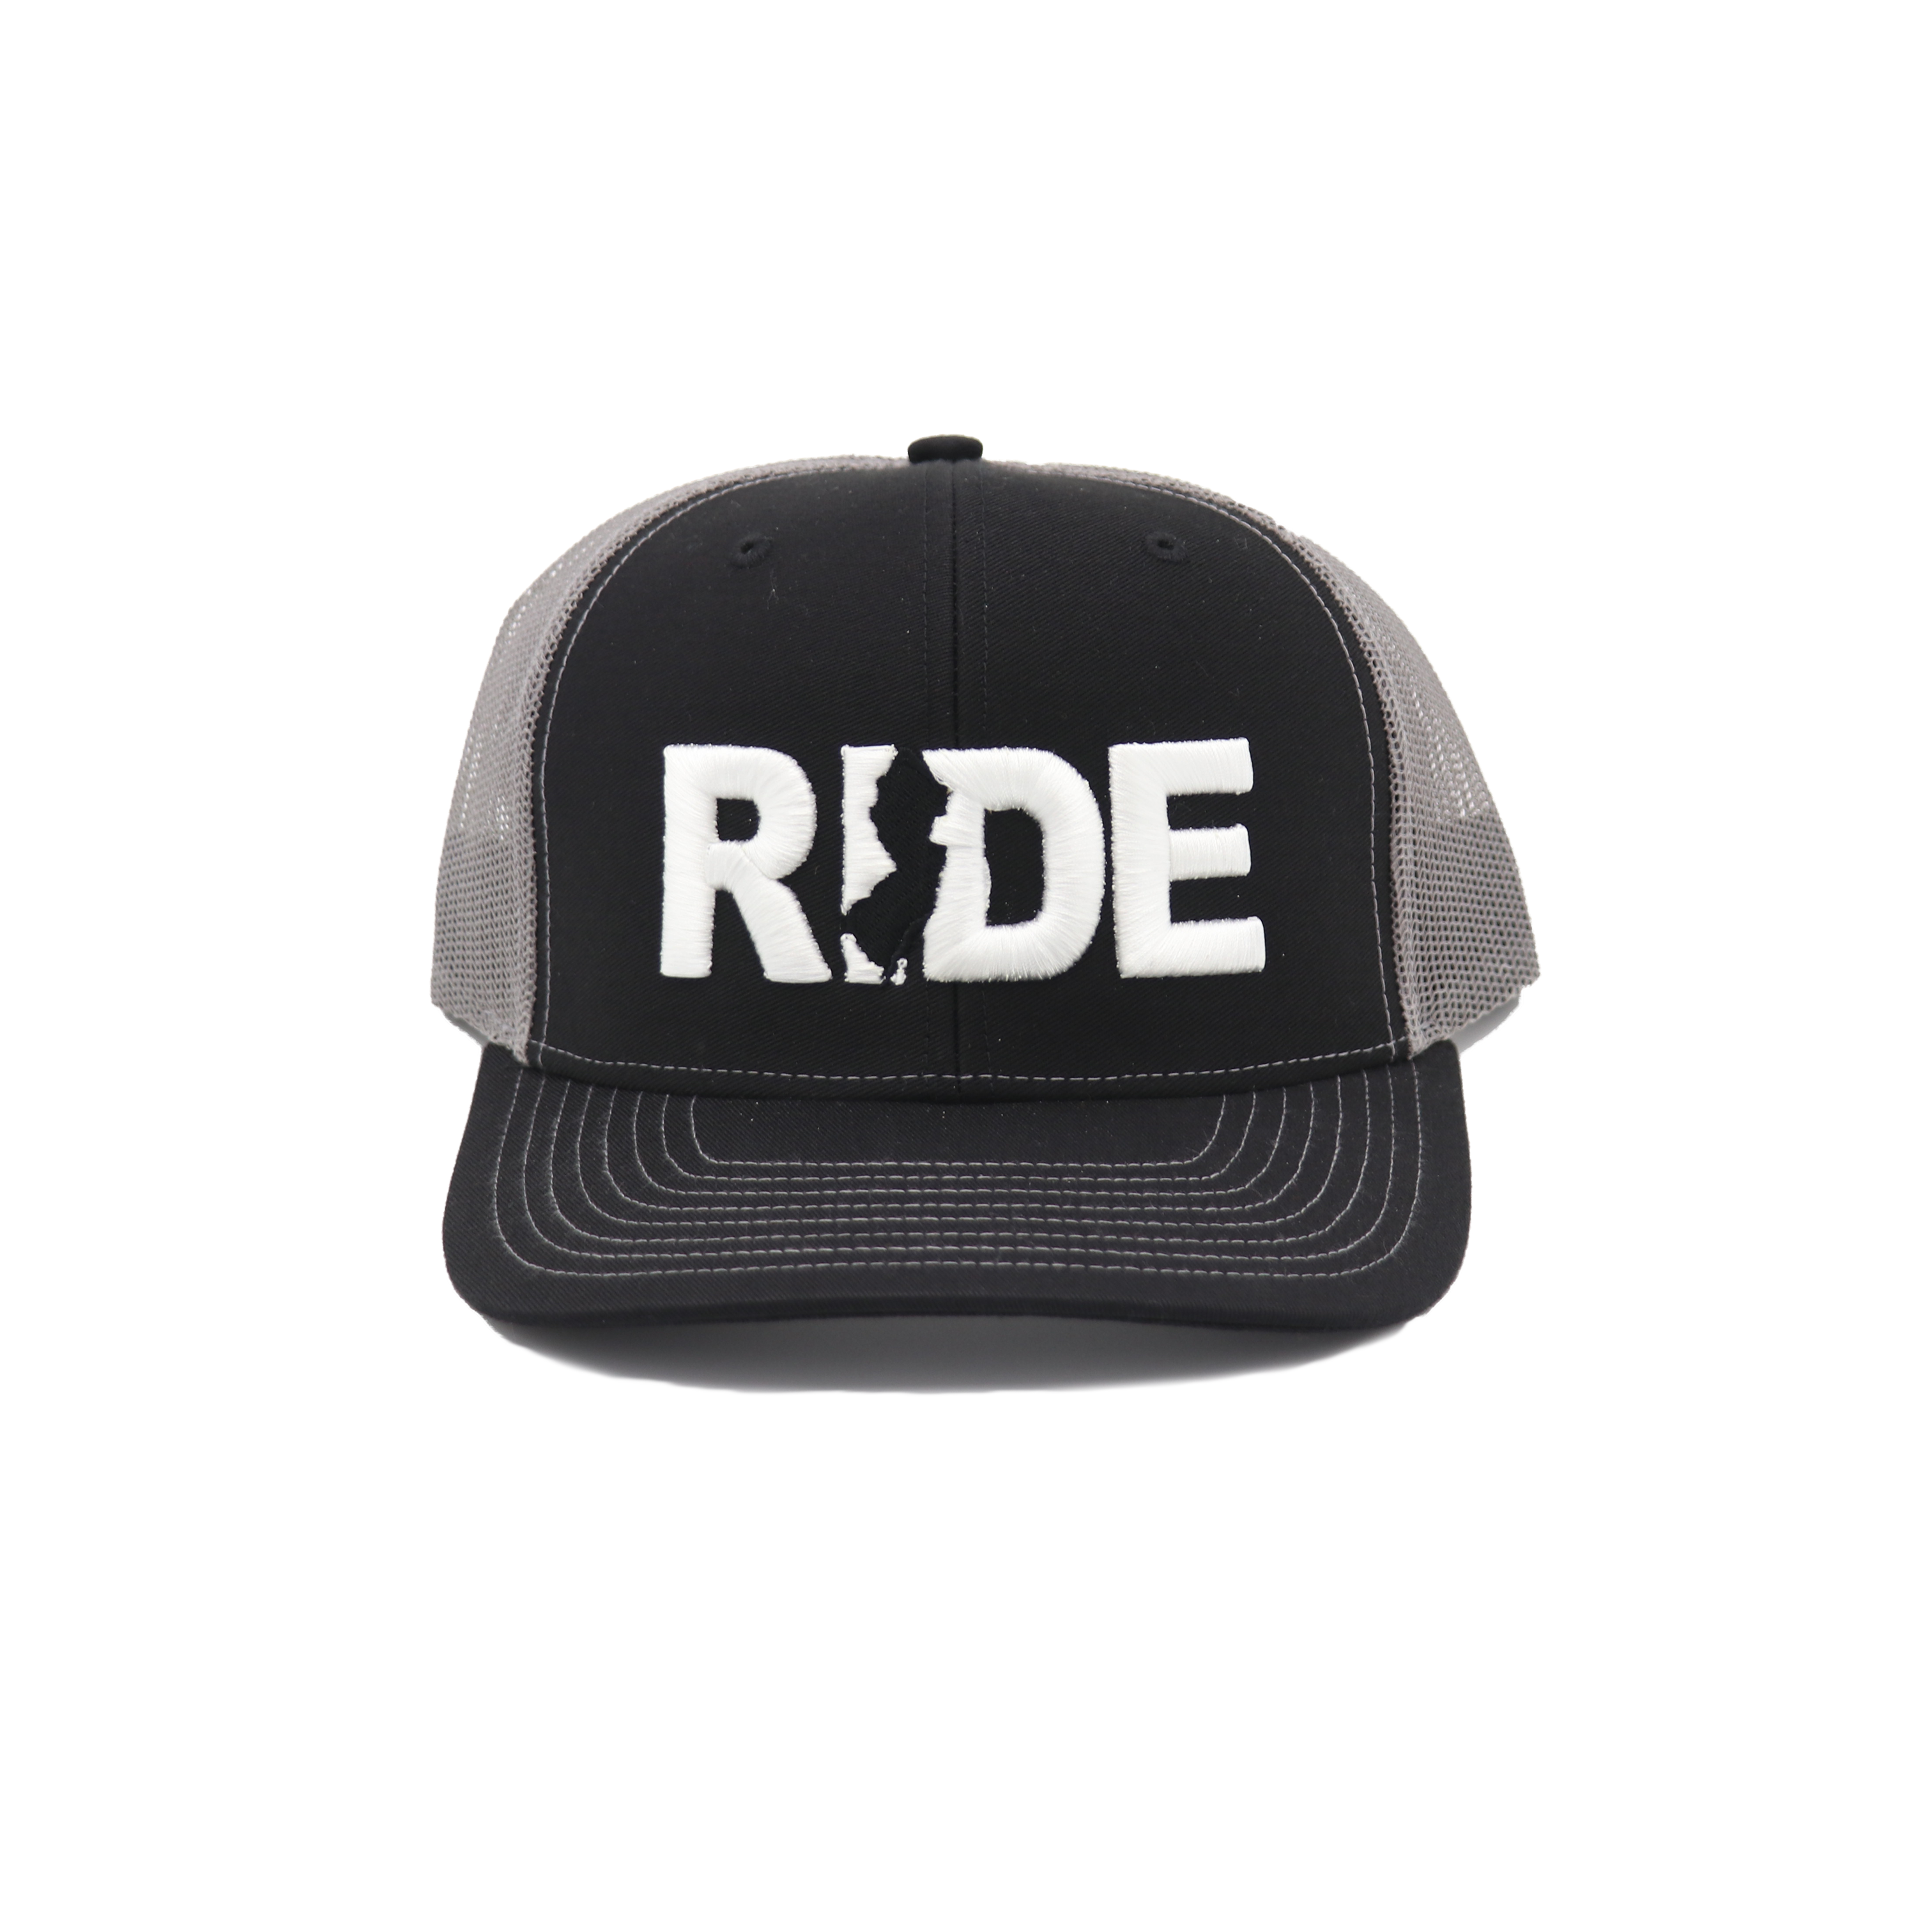 Ride New Jersey Classic Embroidered Snapback Trucker Hat Black/Gray